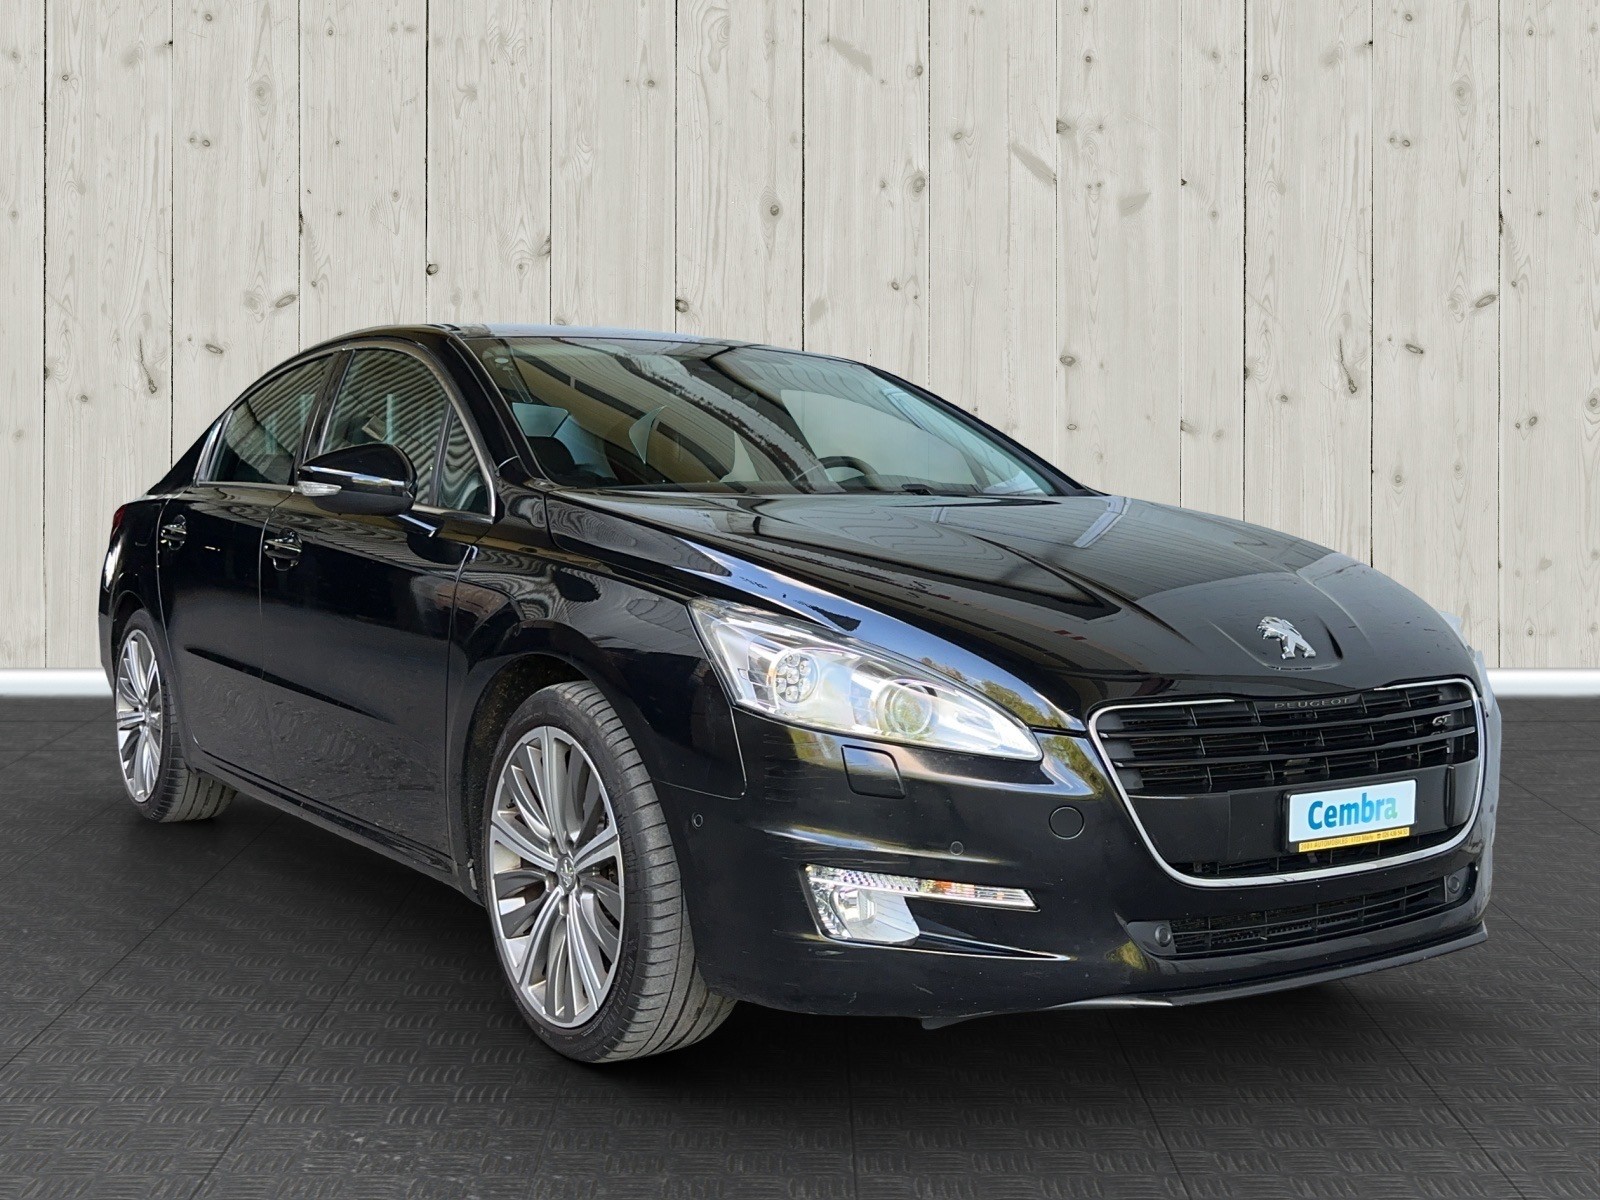 PEUGEOT 508 2.2 HDI GT Automatic